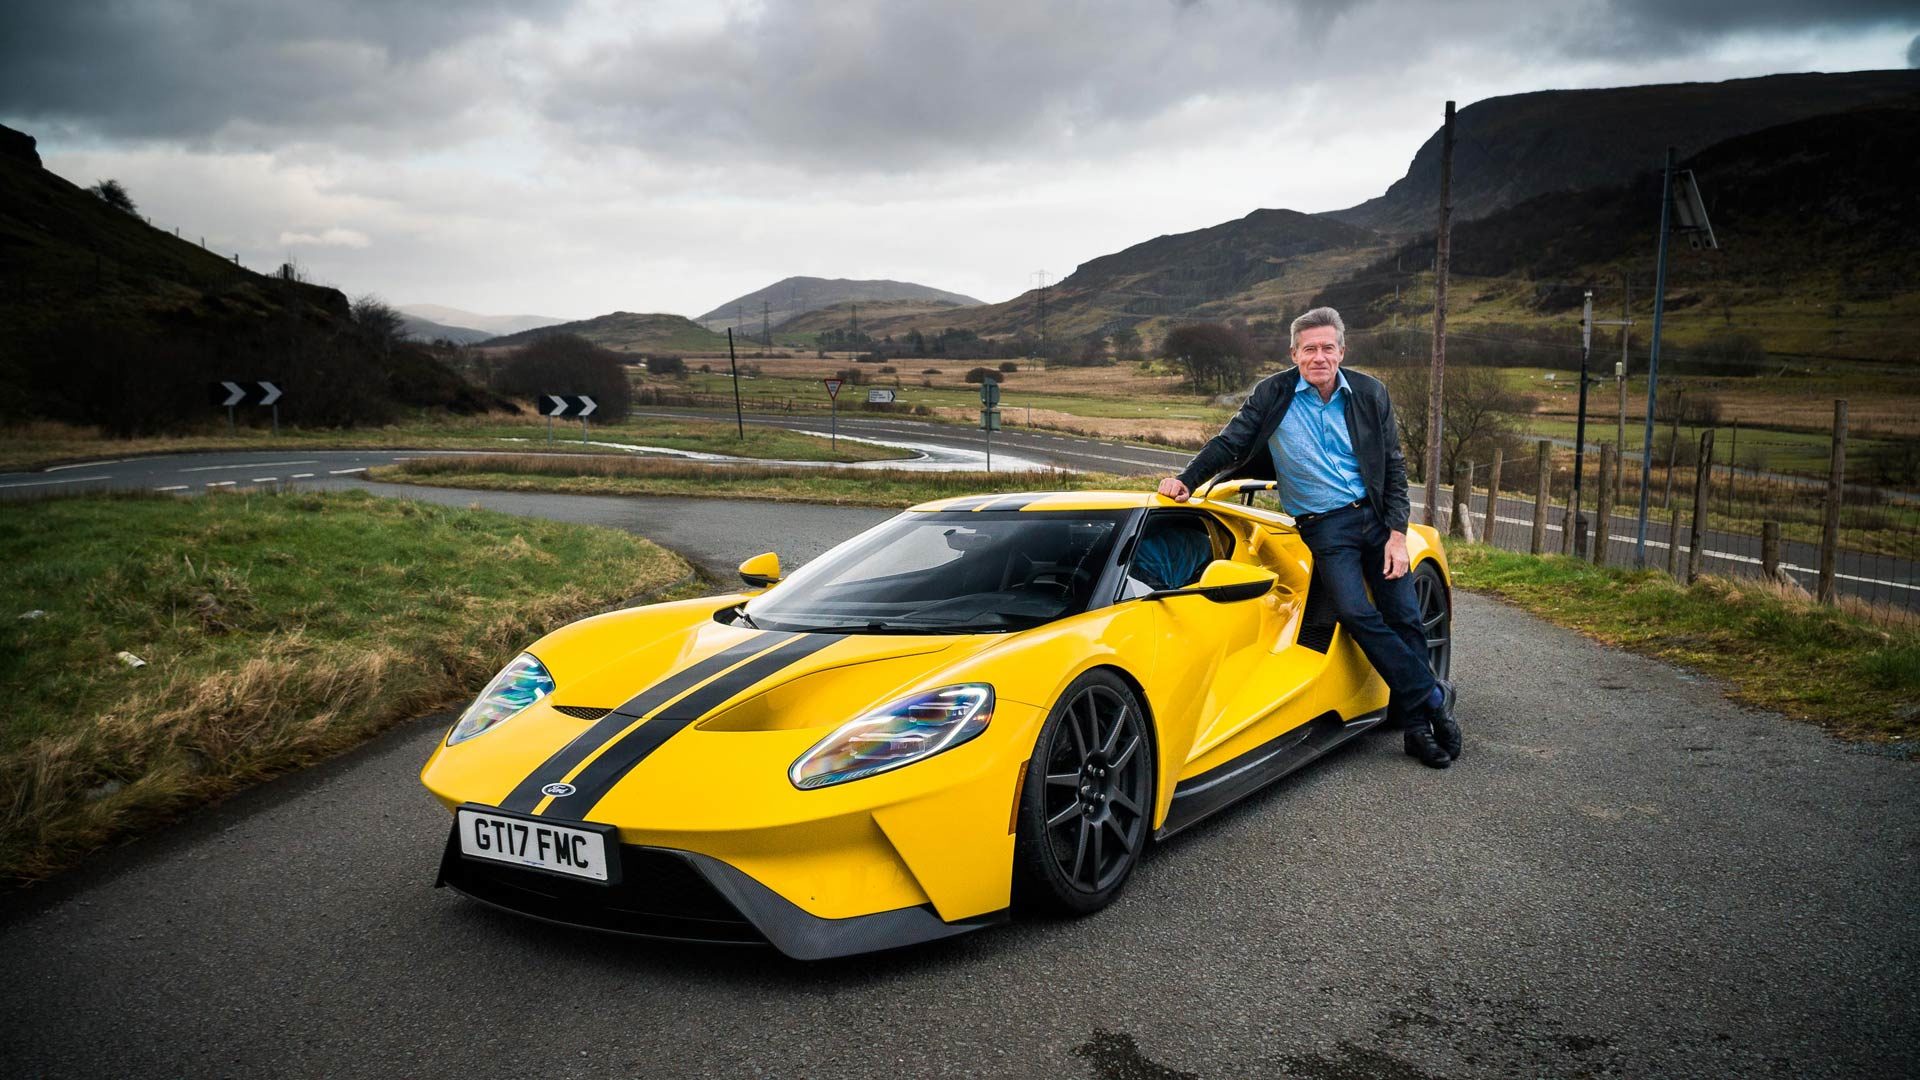 Tiff Needell back on TV with Lovecars